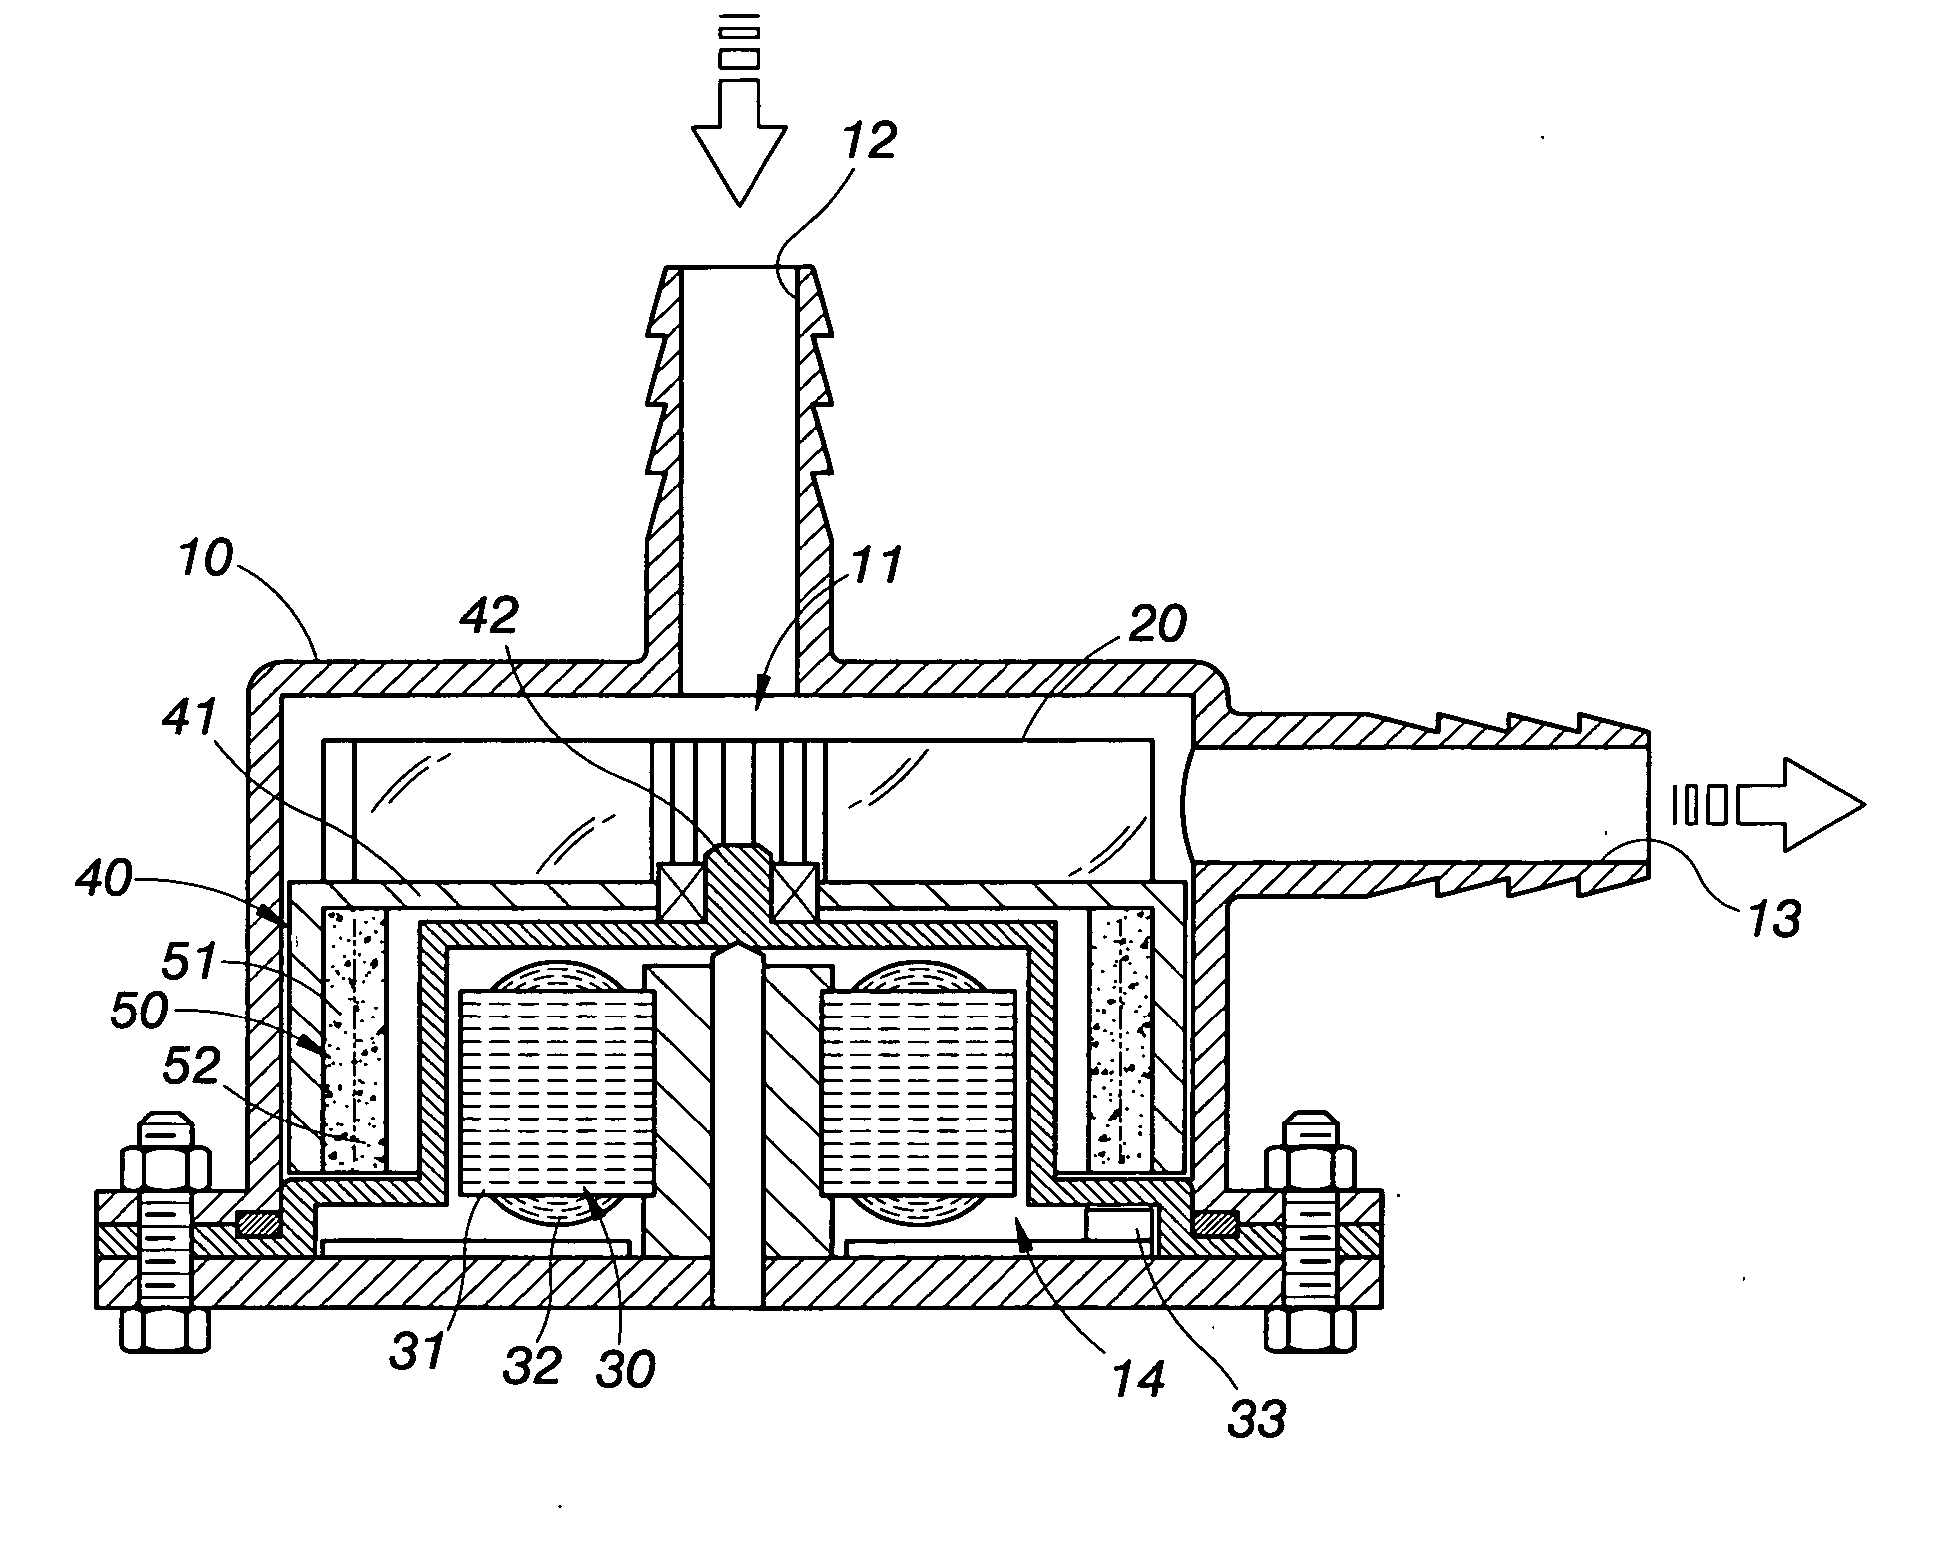 Outer-rotor-driving pump having annular ferrite magnet with grain alignment on its inner periphery